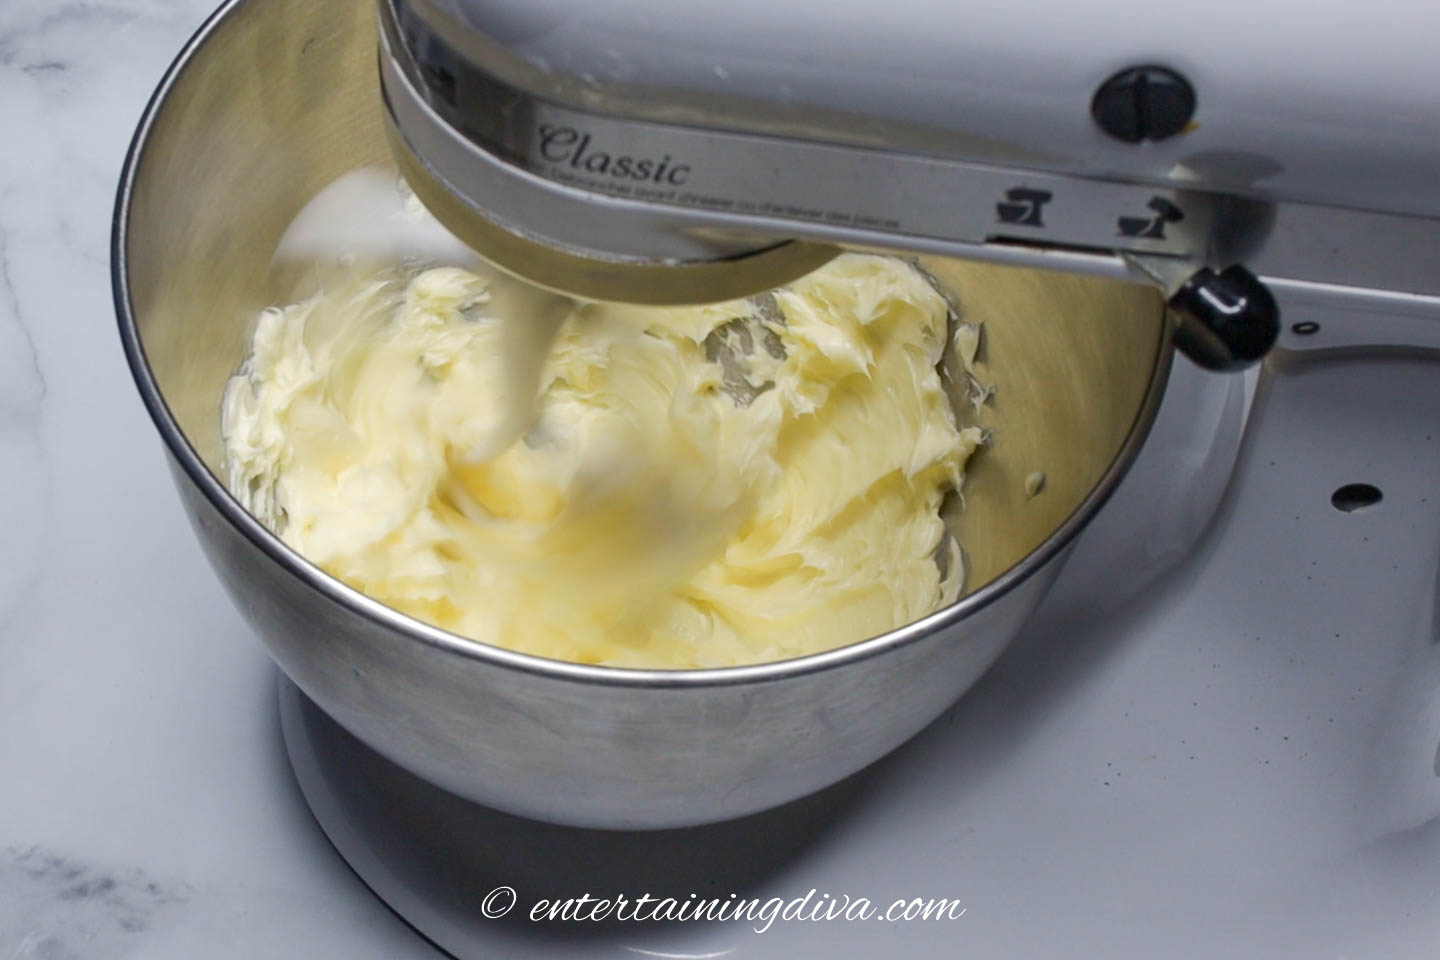 Butter being creamed by an electric mixer